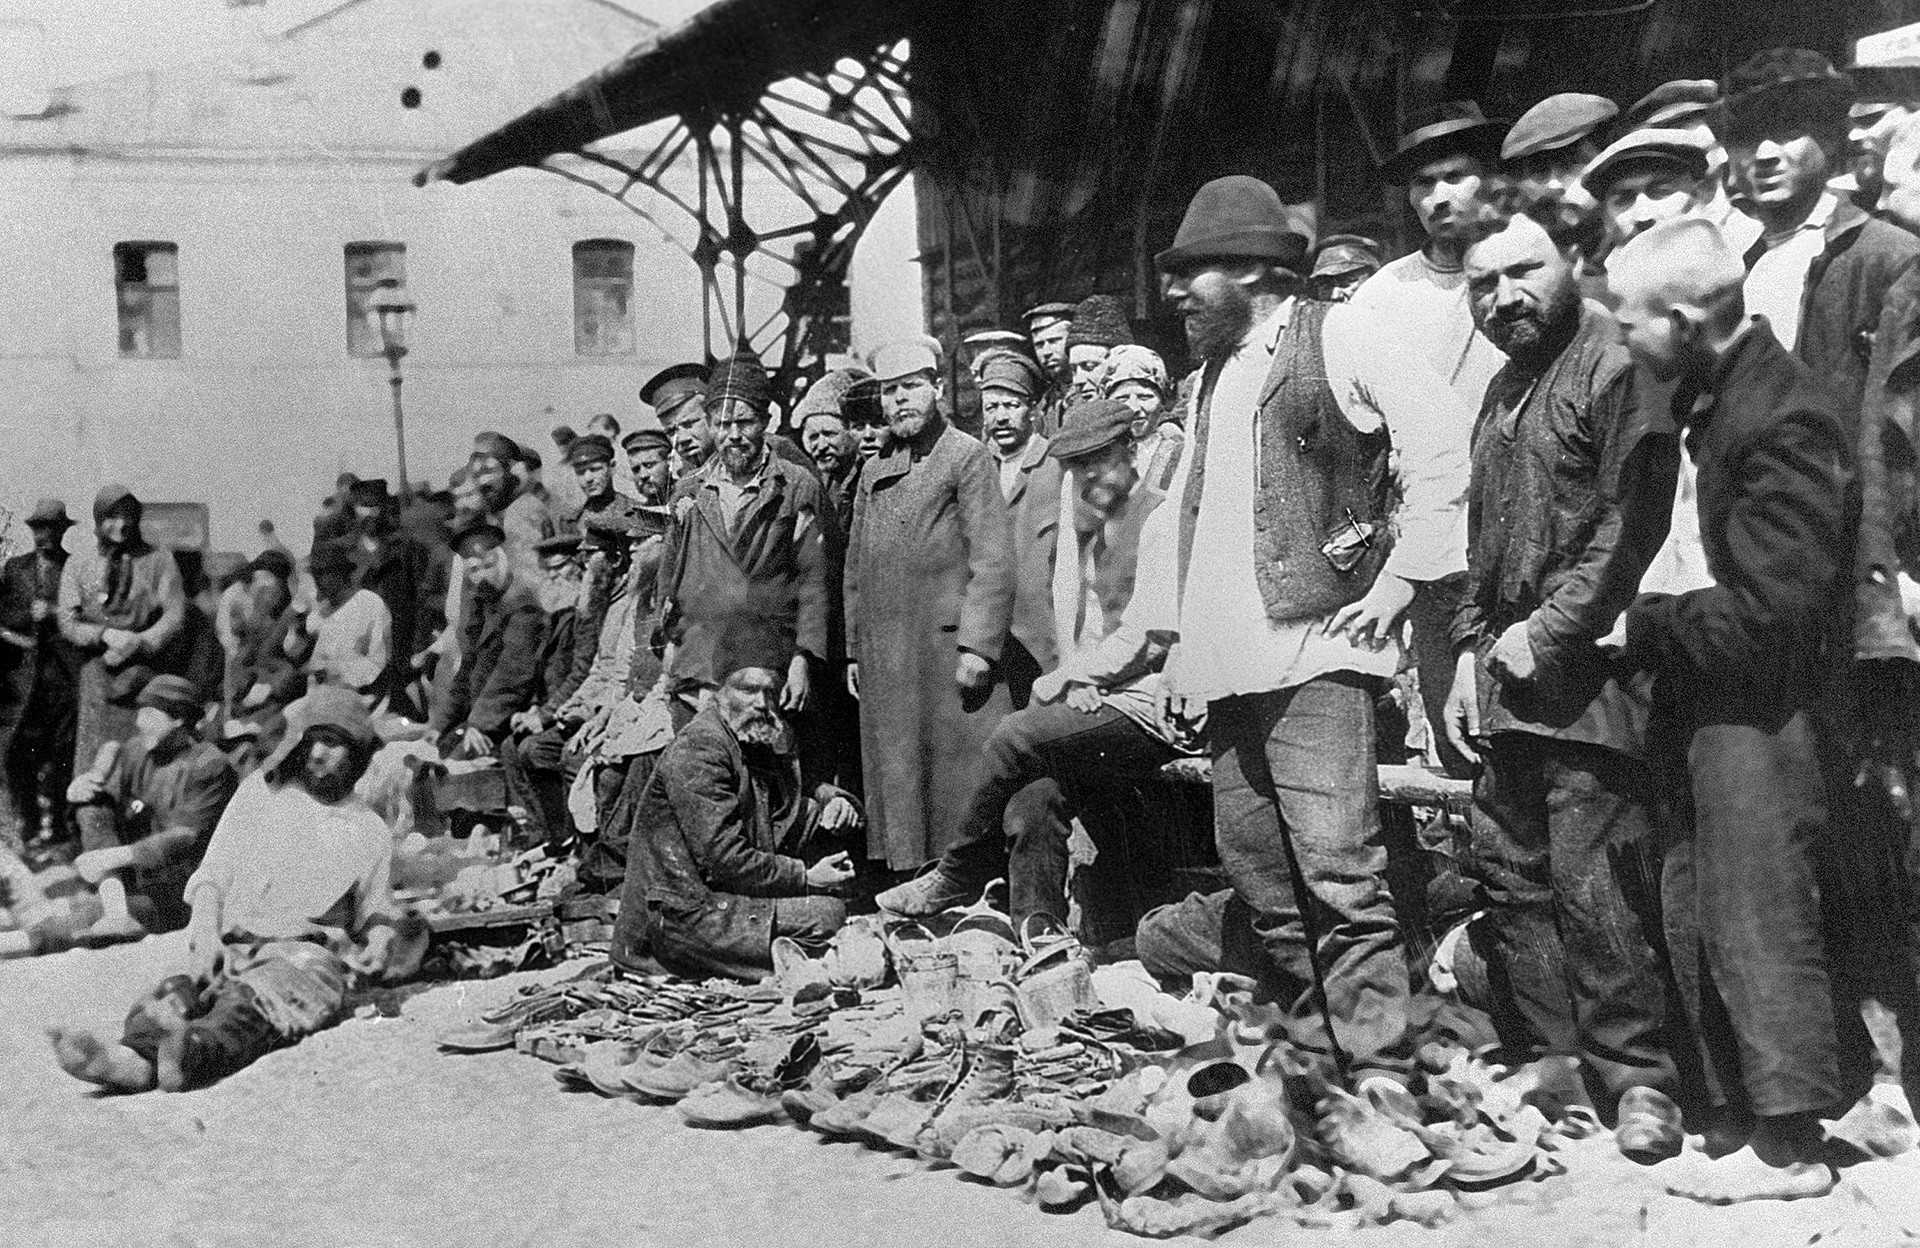 Shoe sale at Hitrovskiy market in Moscow. This was the place where a lot of criminals came to look for jobs.